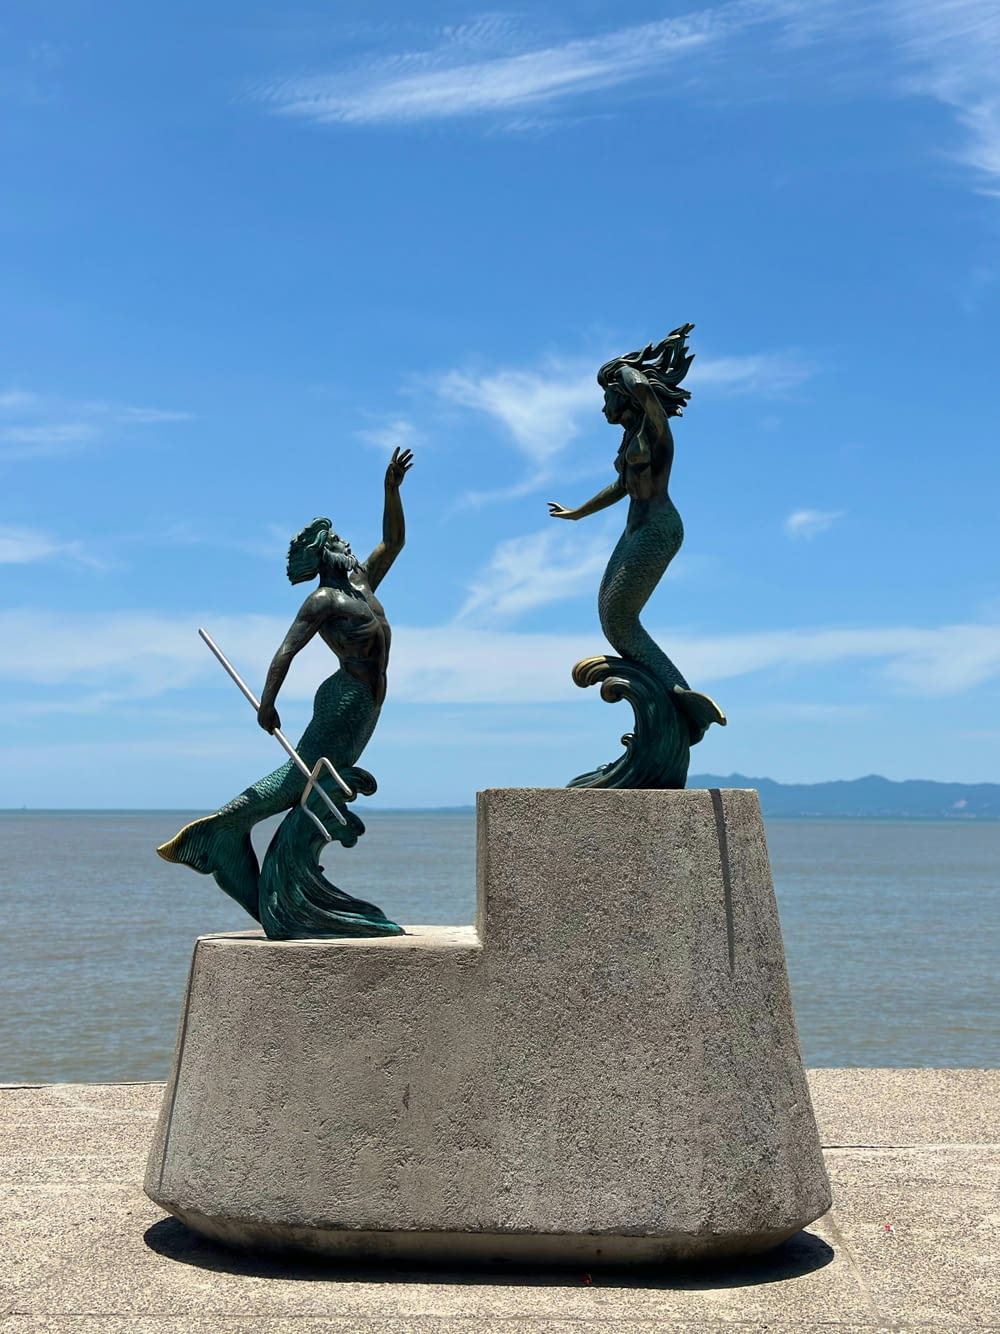 a statue of two mermaids on a rock near the ocean